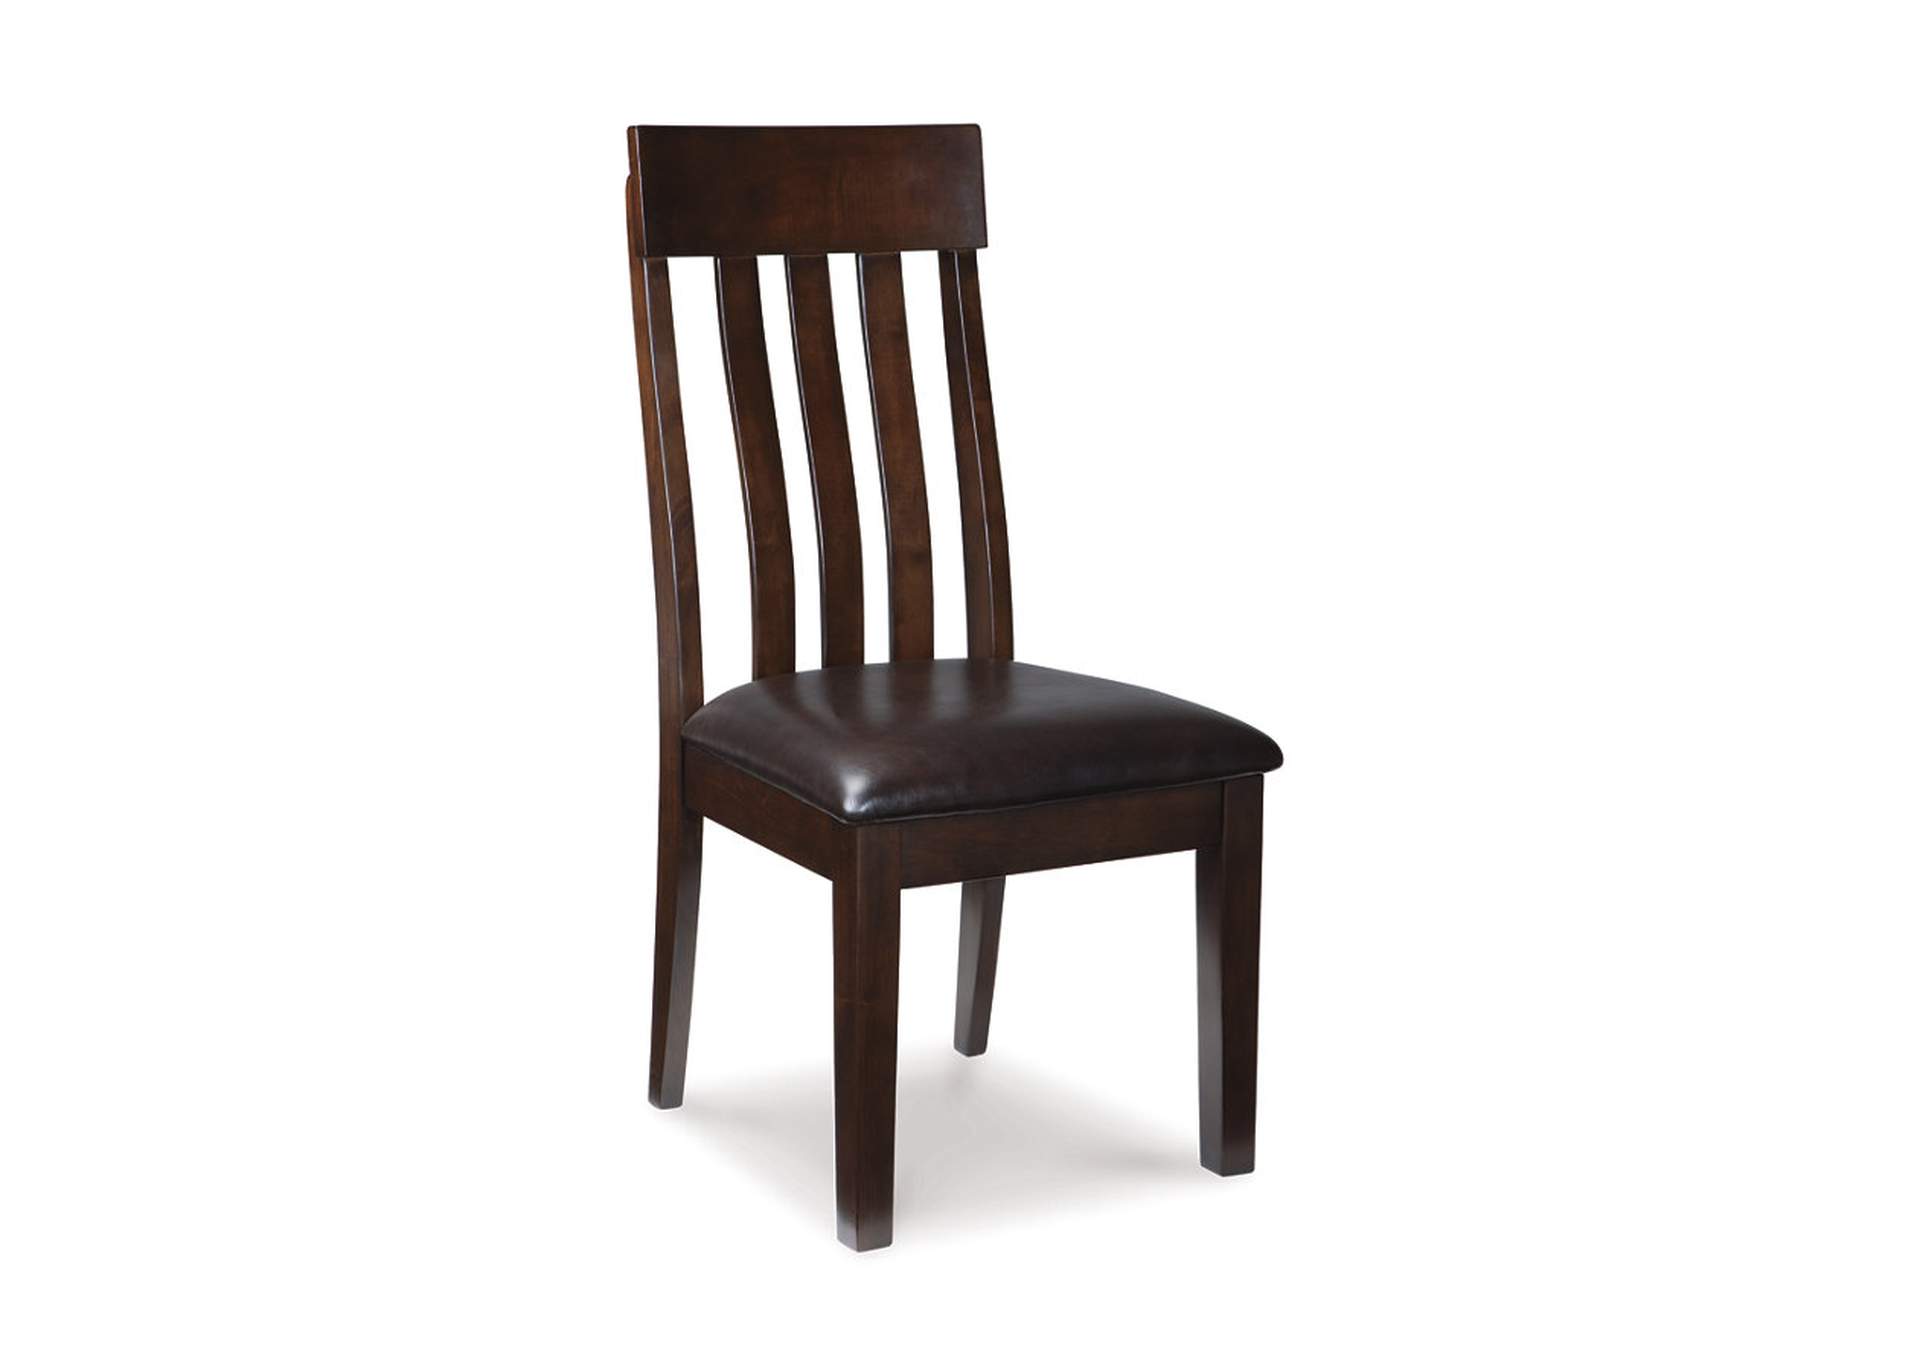 Haddigan 2-Piece Dining Room Chair,Signature Design By Ashley